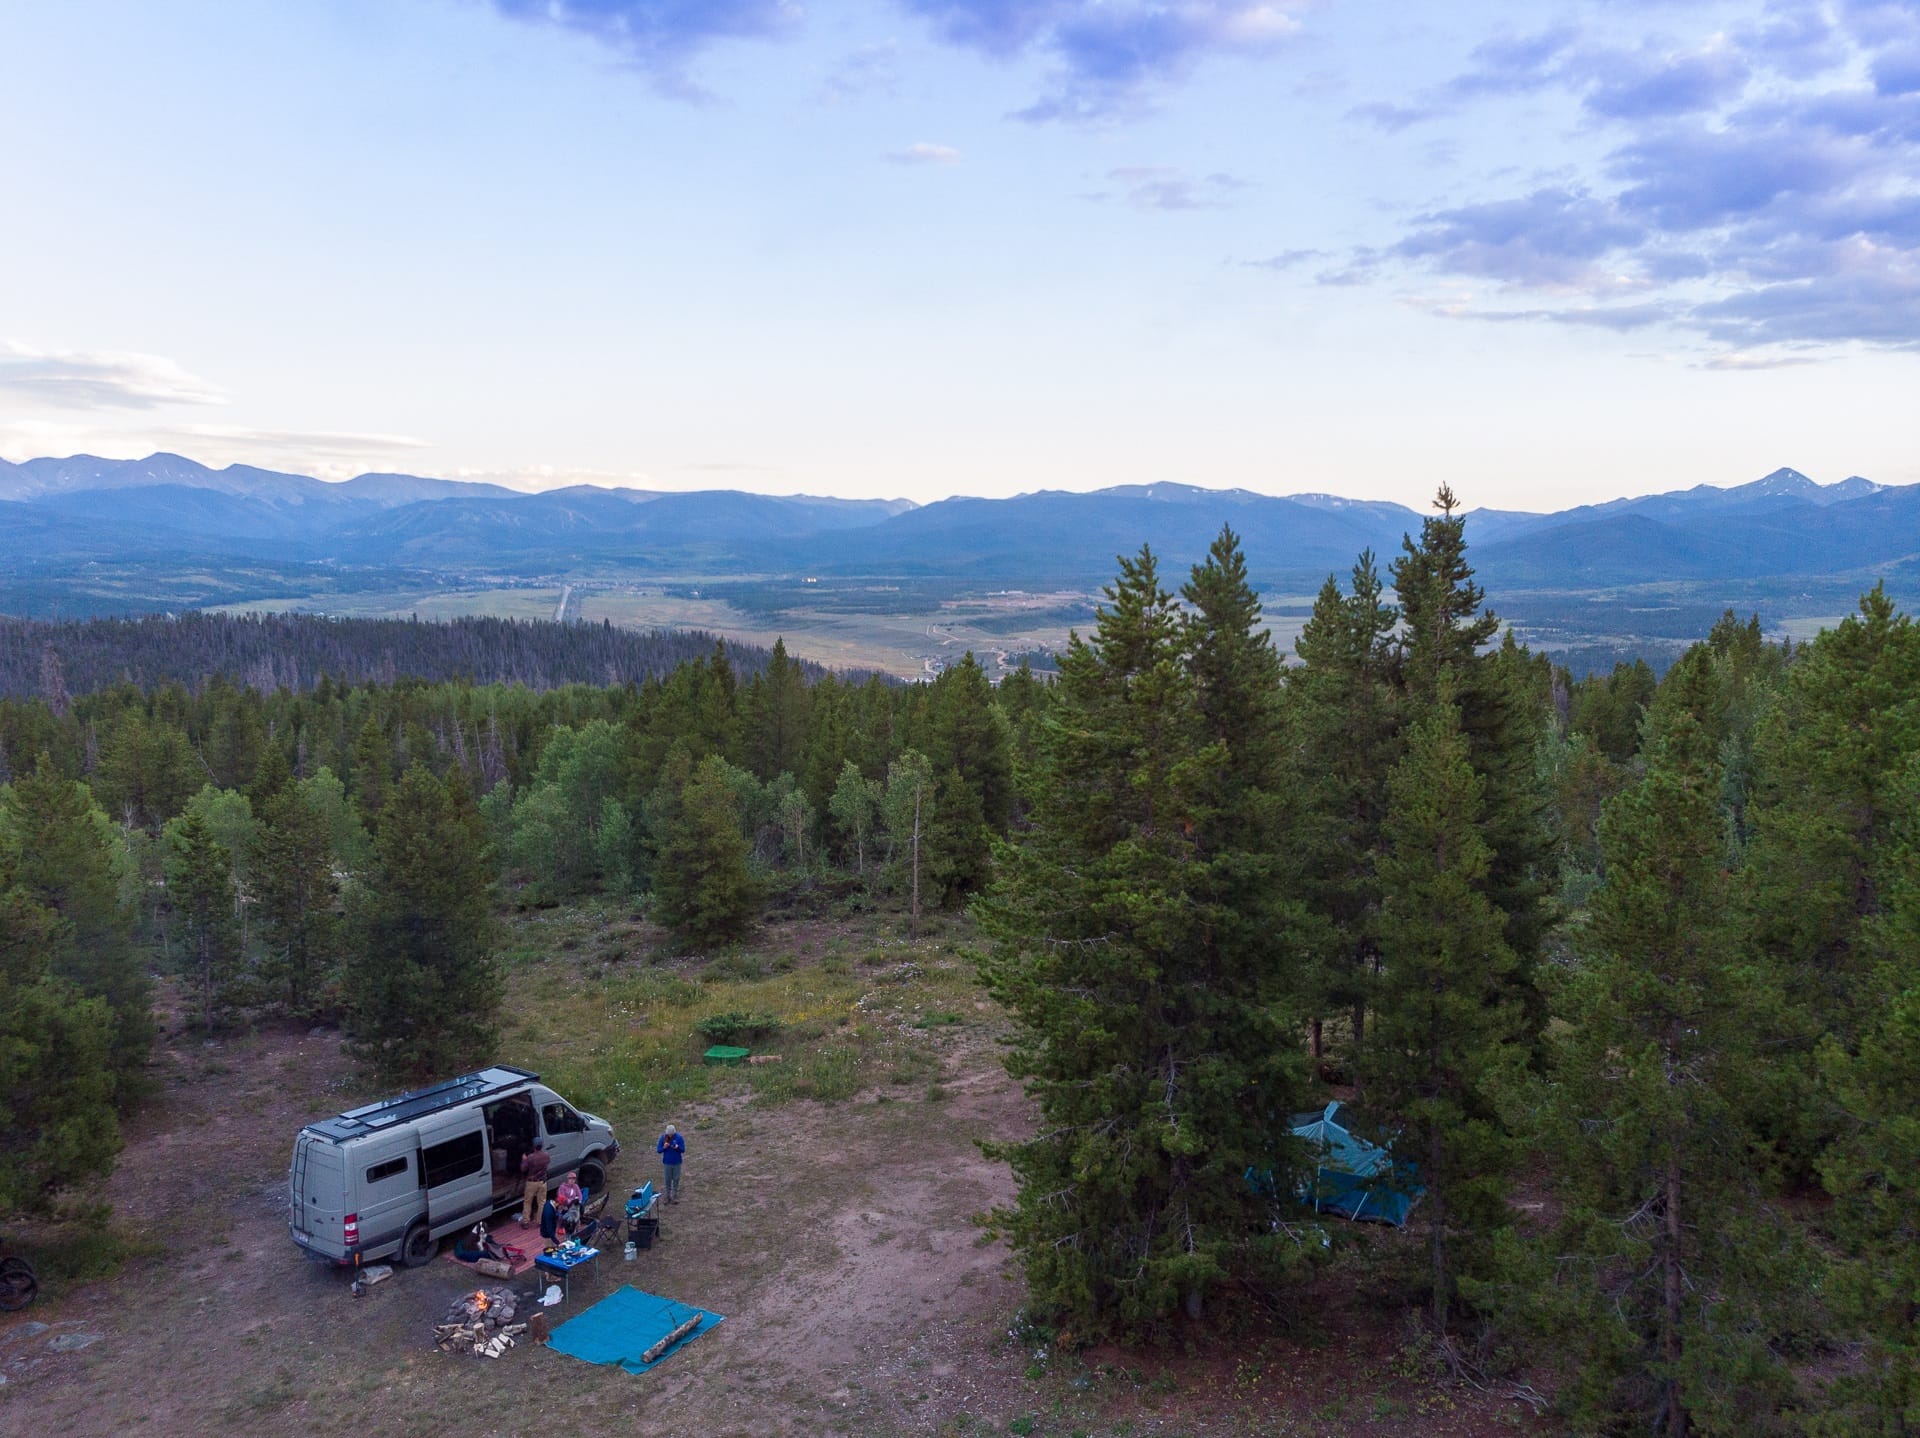 Plan an epic car camping trip with this complete beginner guide including tips for finding campsites, gear, cooking, what to pack, and more.